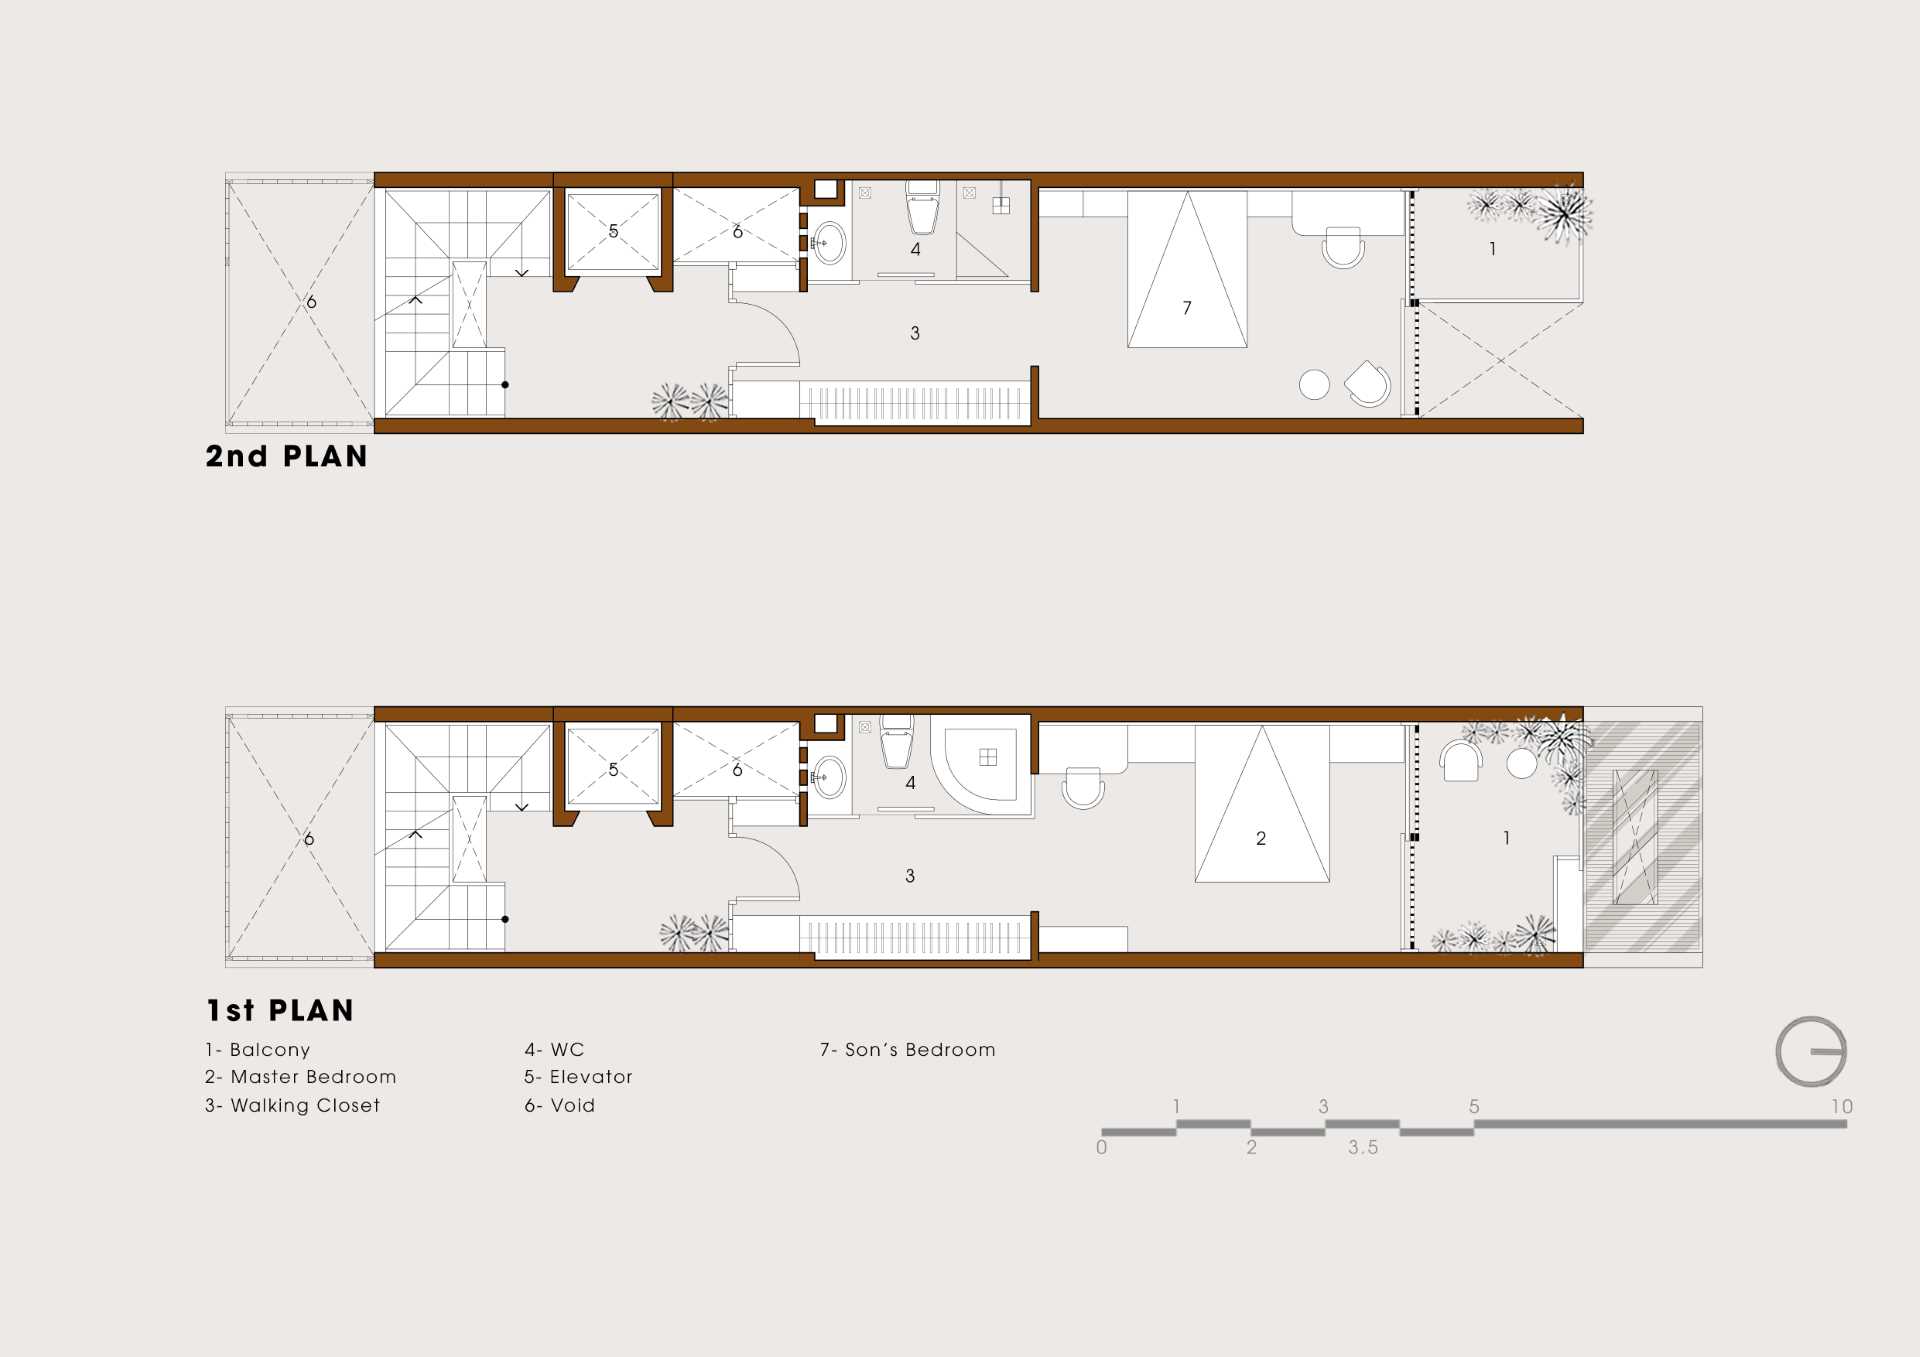 The architectural drawings for a tall and skinny home.